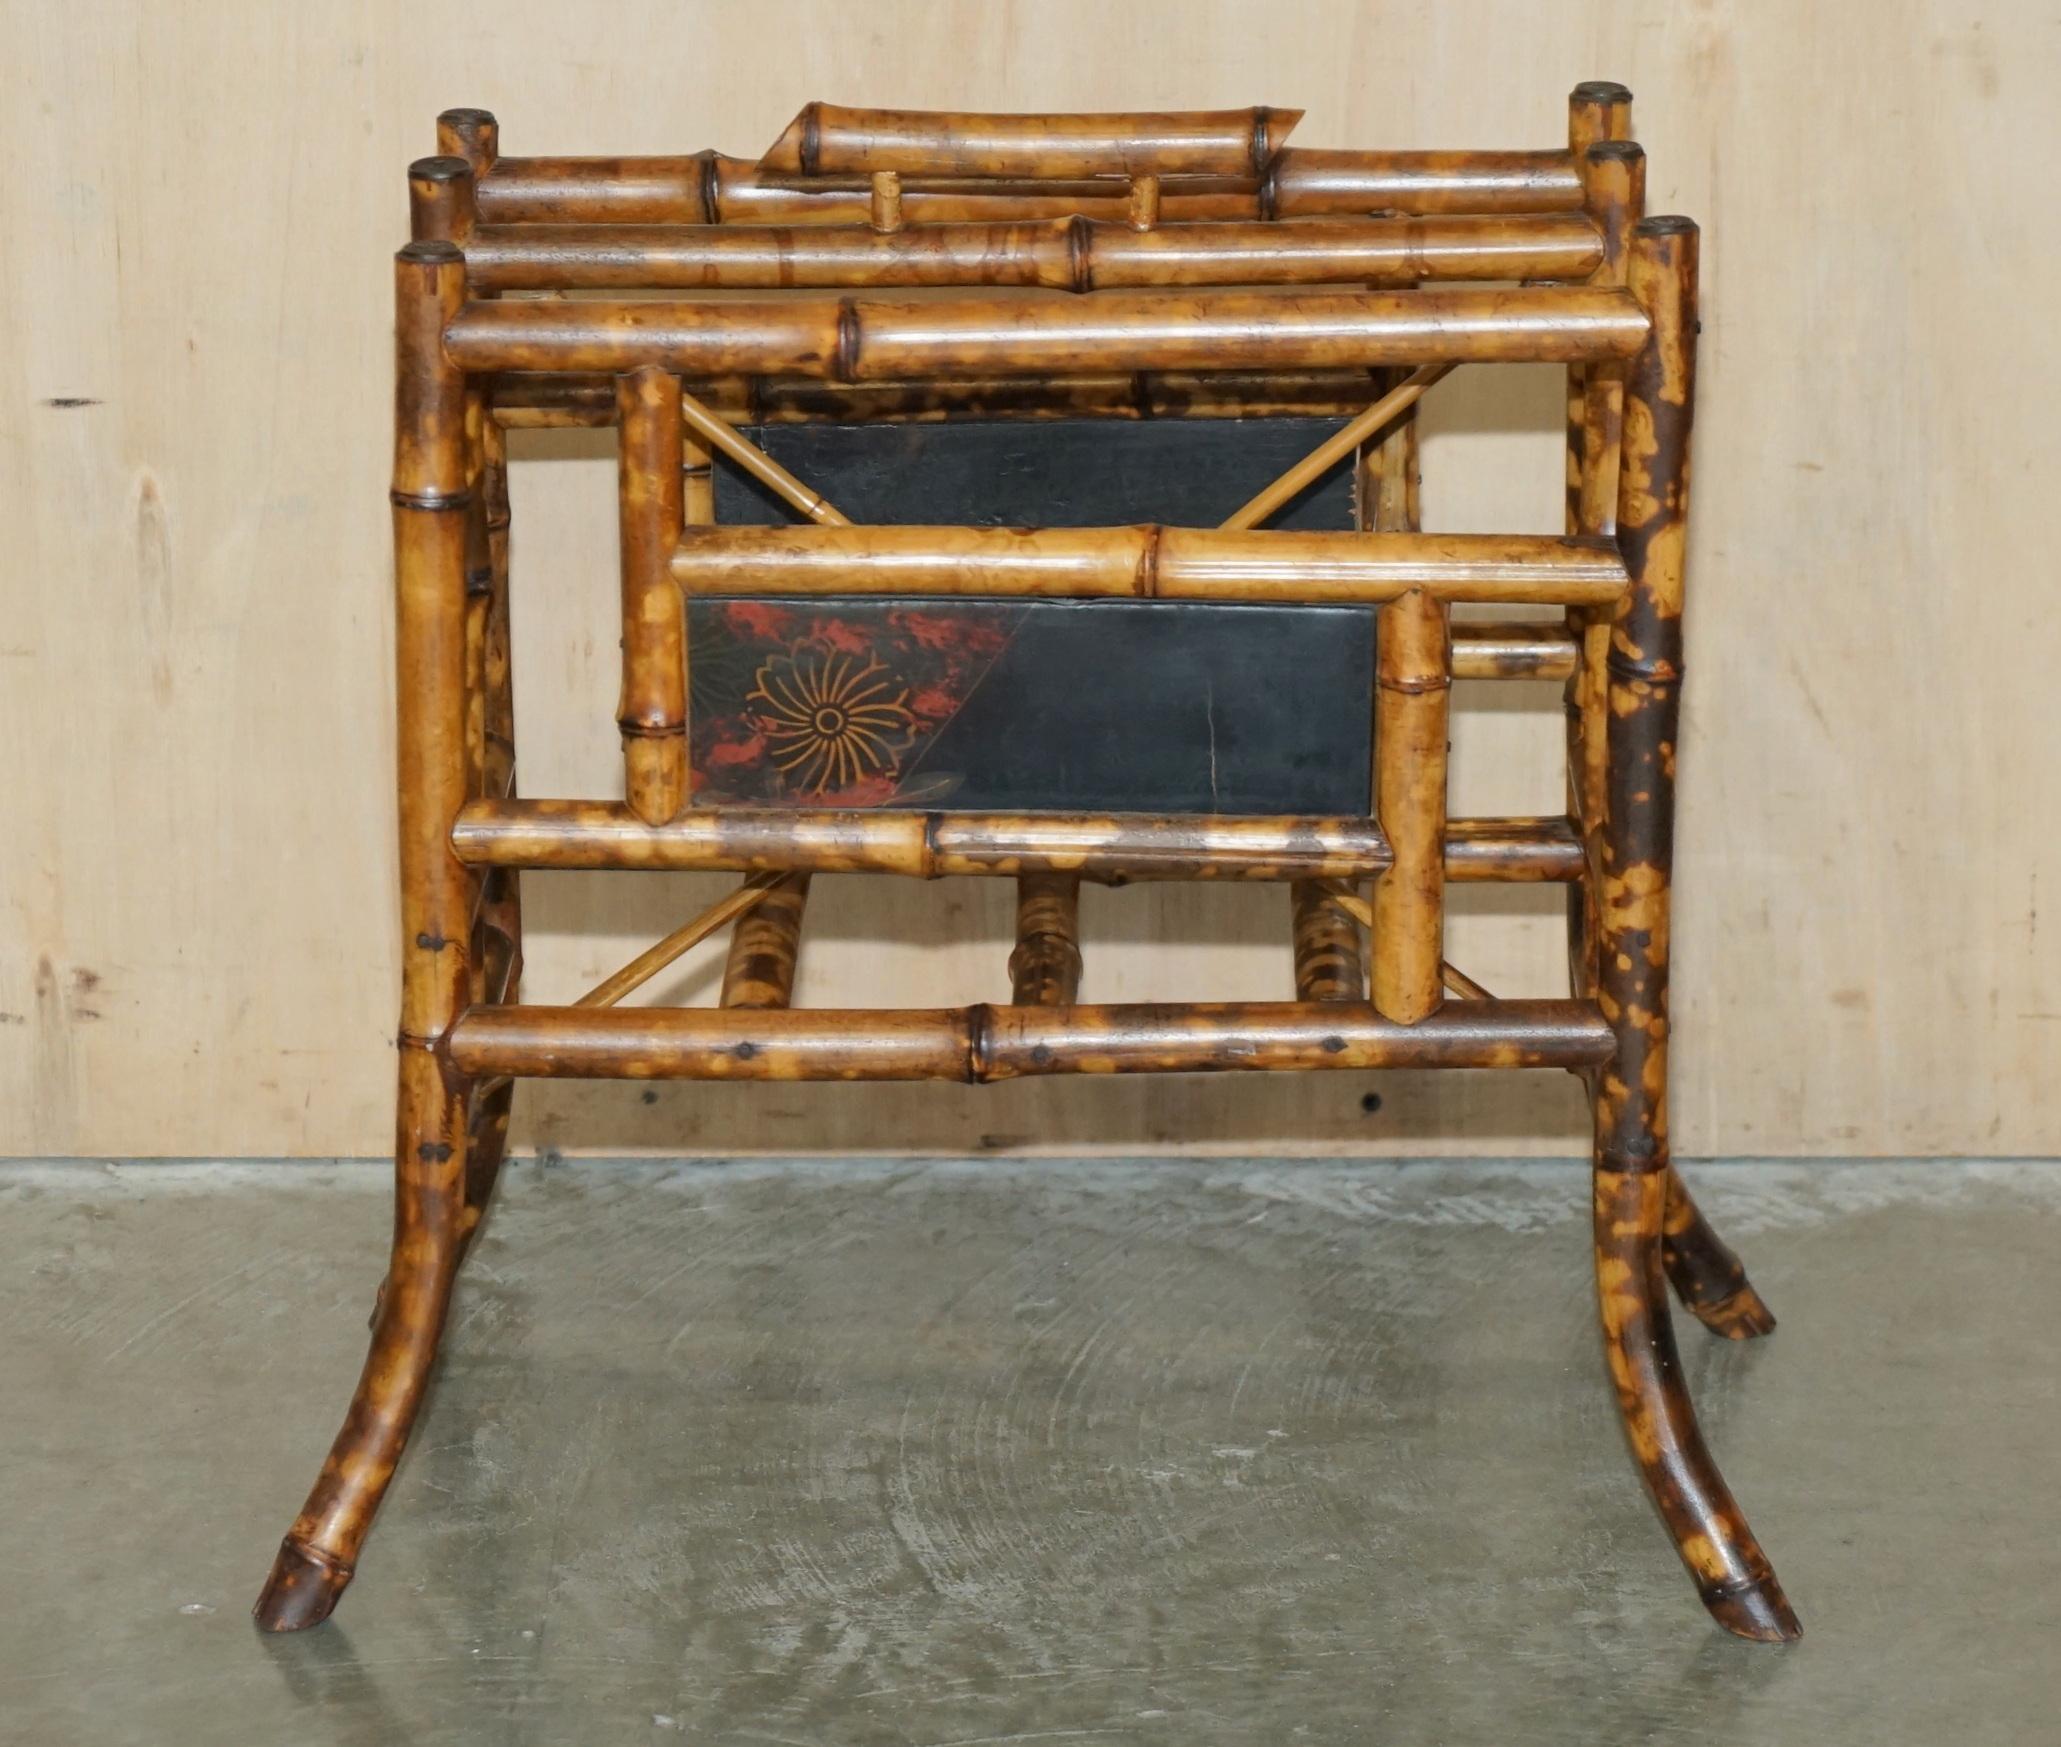 Royal House Antiques

Royal House Antiques is delighted to offer for sale this super rare and highly collectable Aesthetic Movement Chinese hand carved bamboo newspaper magazine rack 

Please note the delivery fee listed is just a guide, it covers